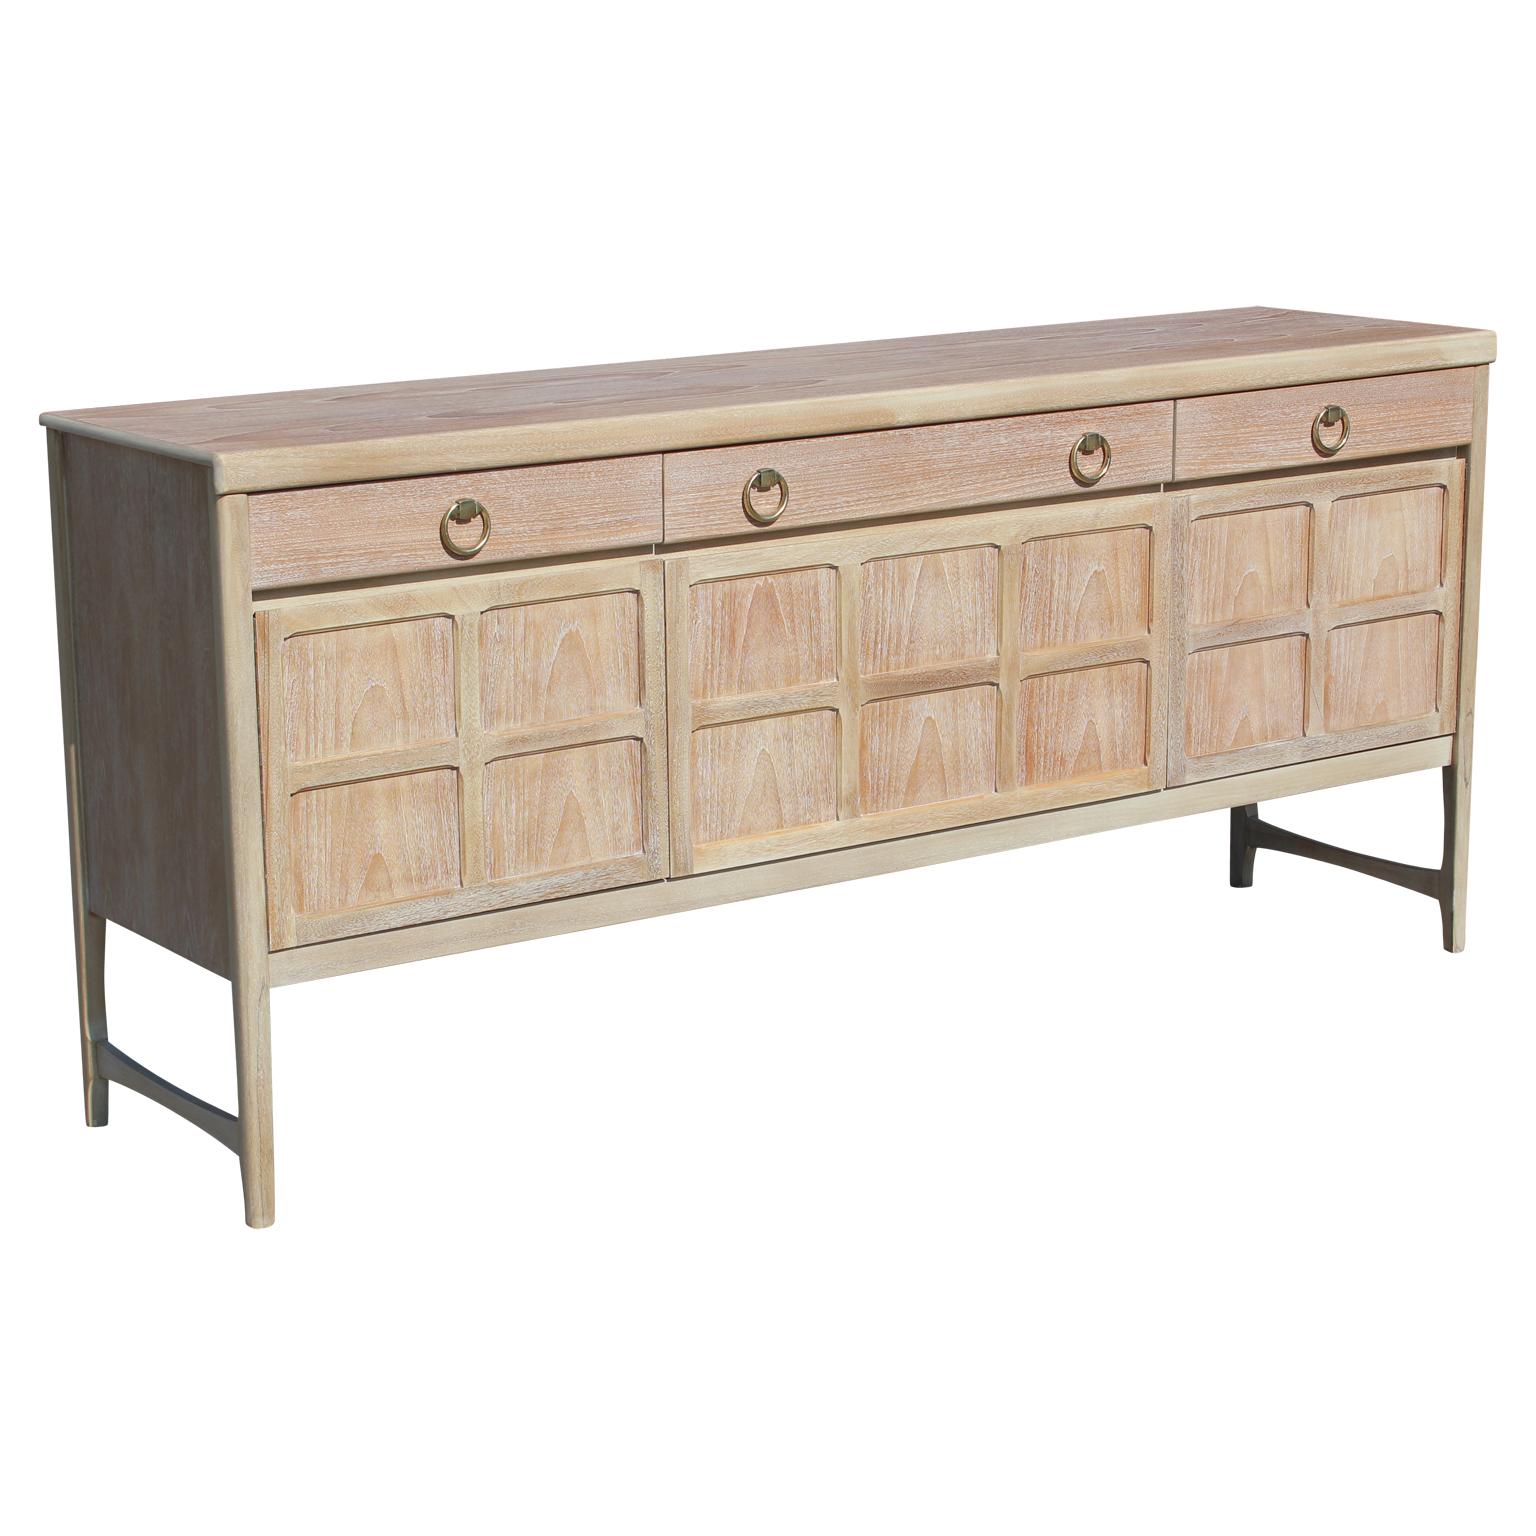 English Modern Hollywood Regency Natural Finish Sideboard with Brass Ring Handles